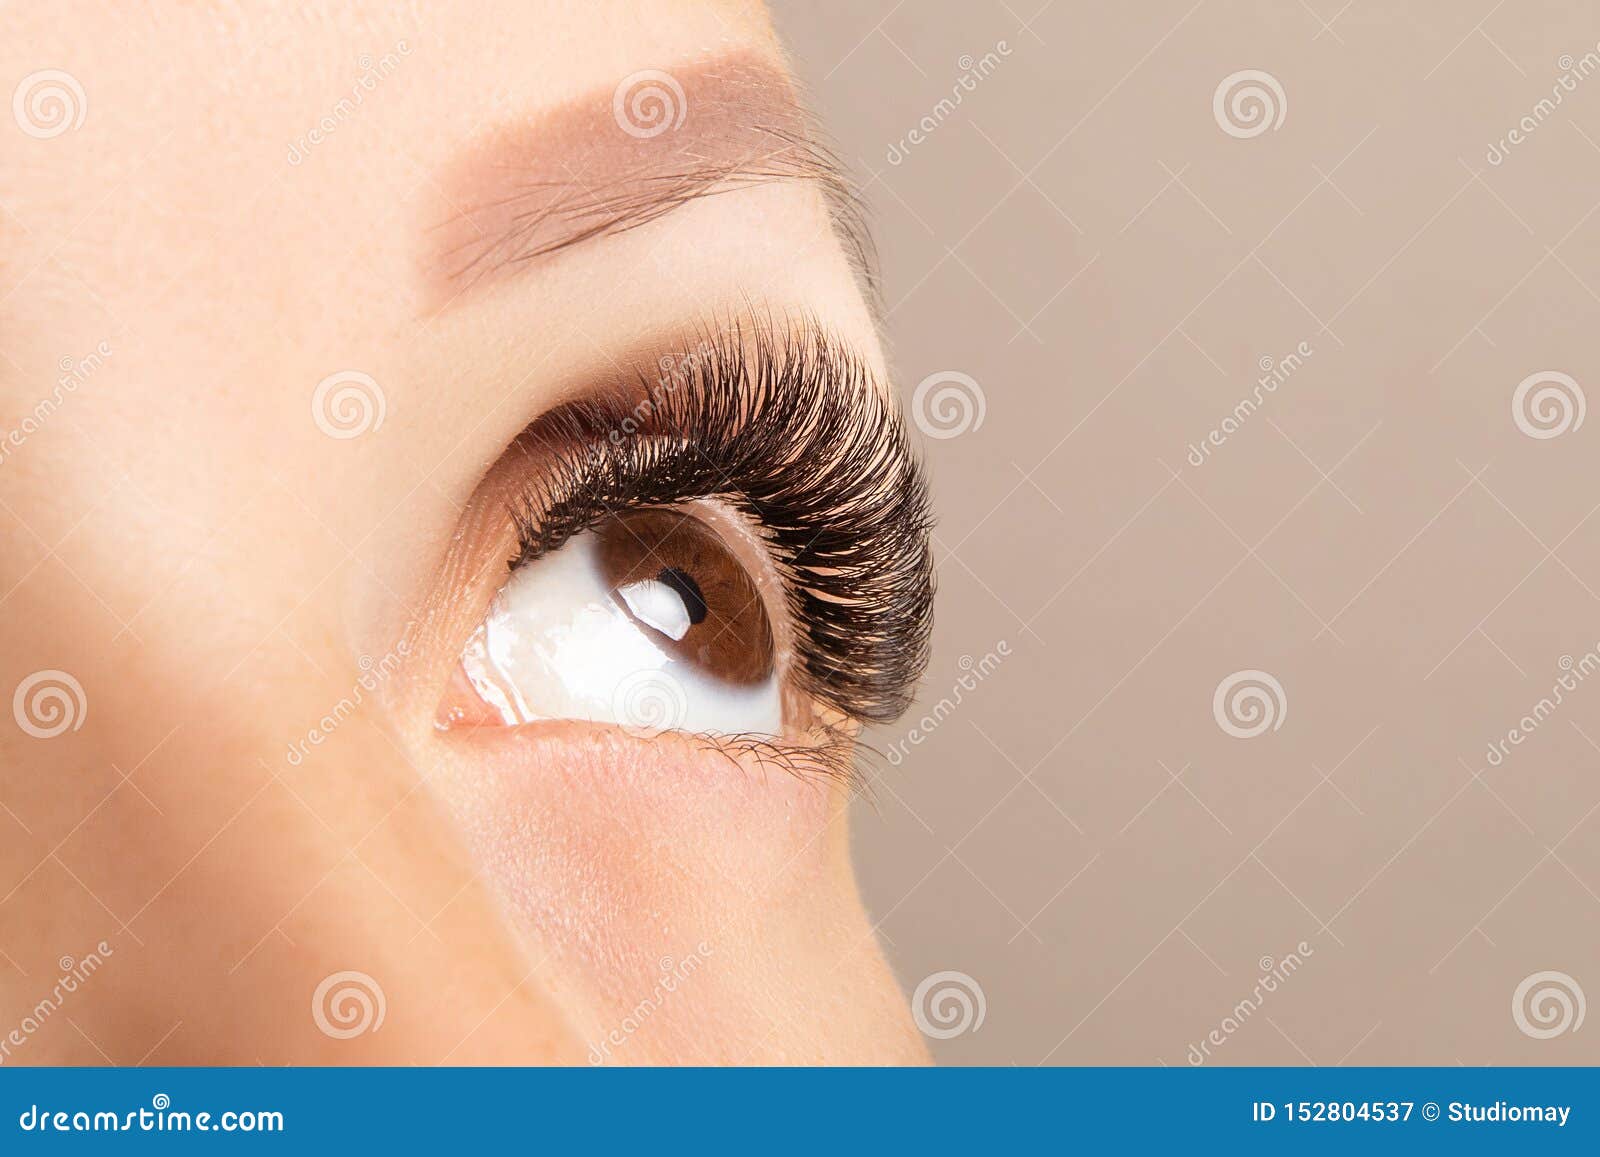 brown eye with beautiful long lashes closeup. brown color eye lash extension, 3d or 4d volume. eyelash care, lamination,